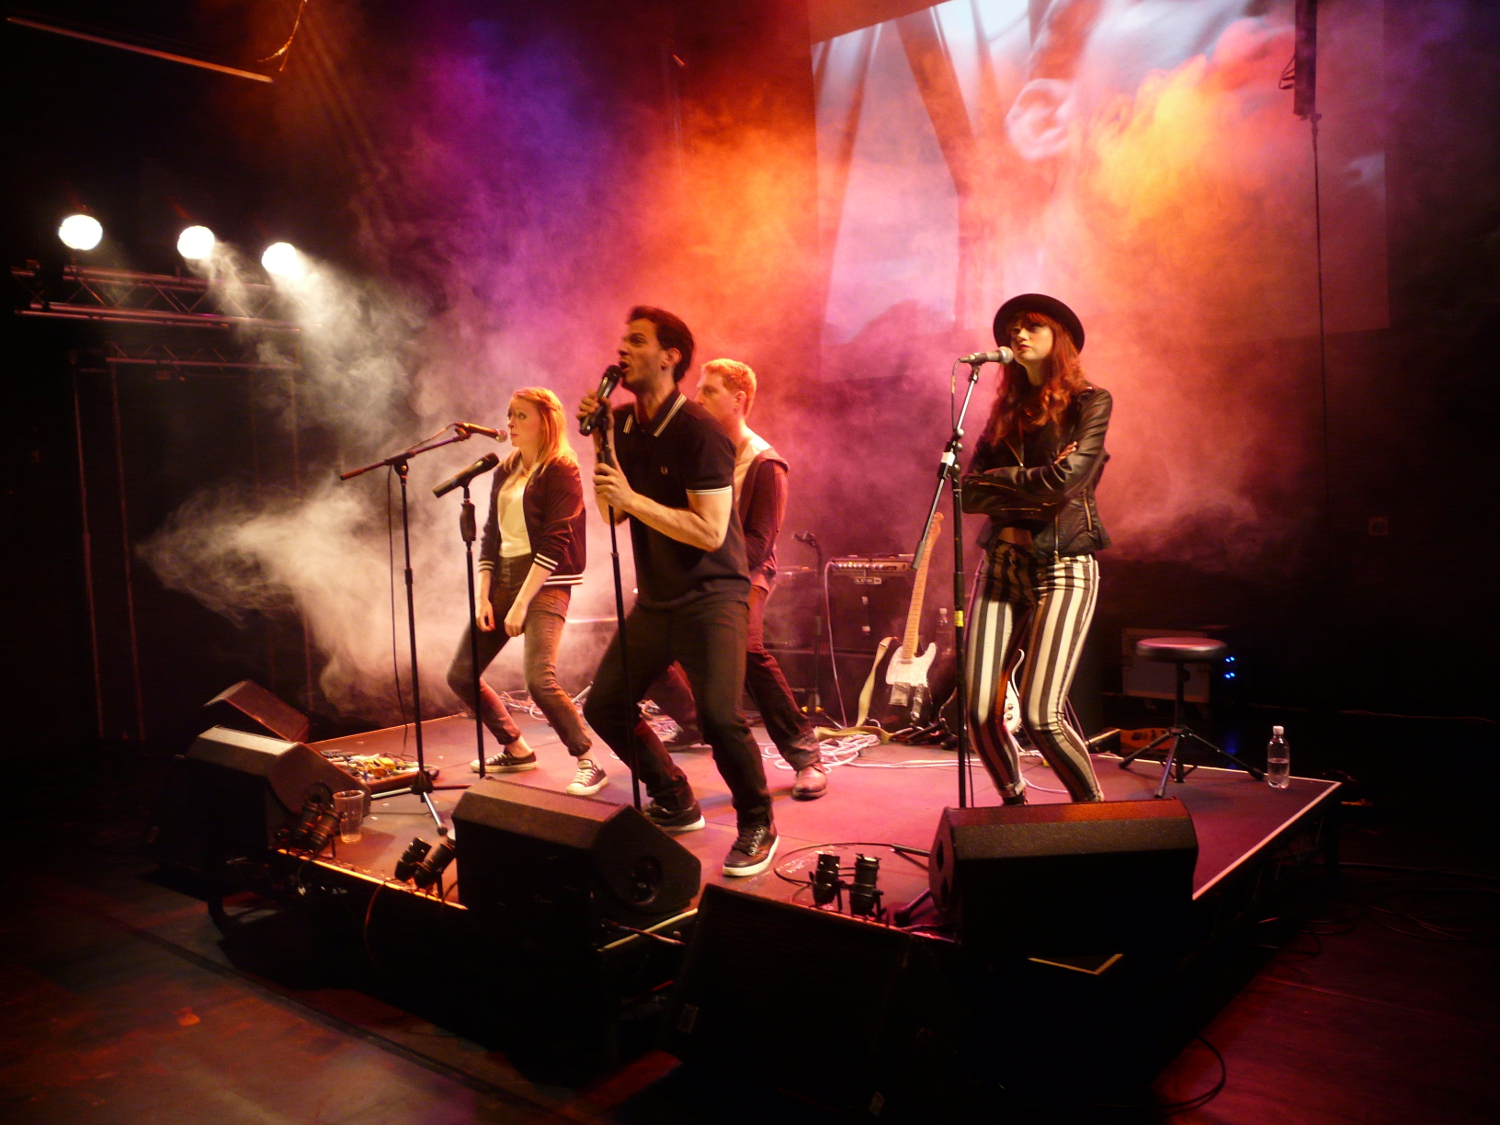 Four performers on stage, posed as a band, singing into microphones, bathed in pink-red light